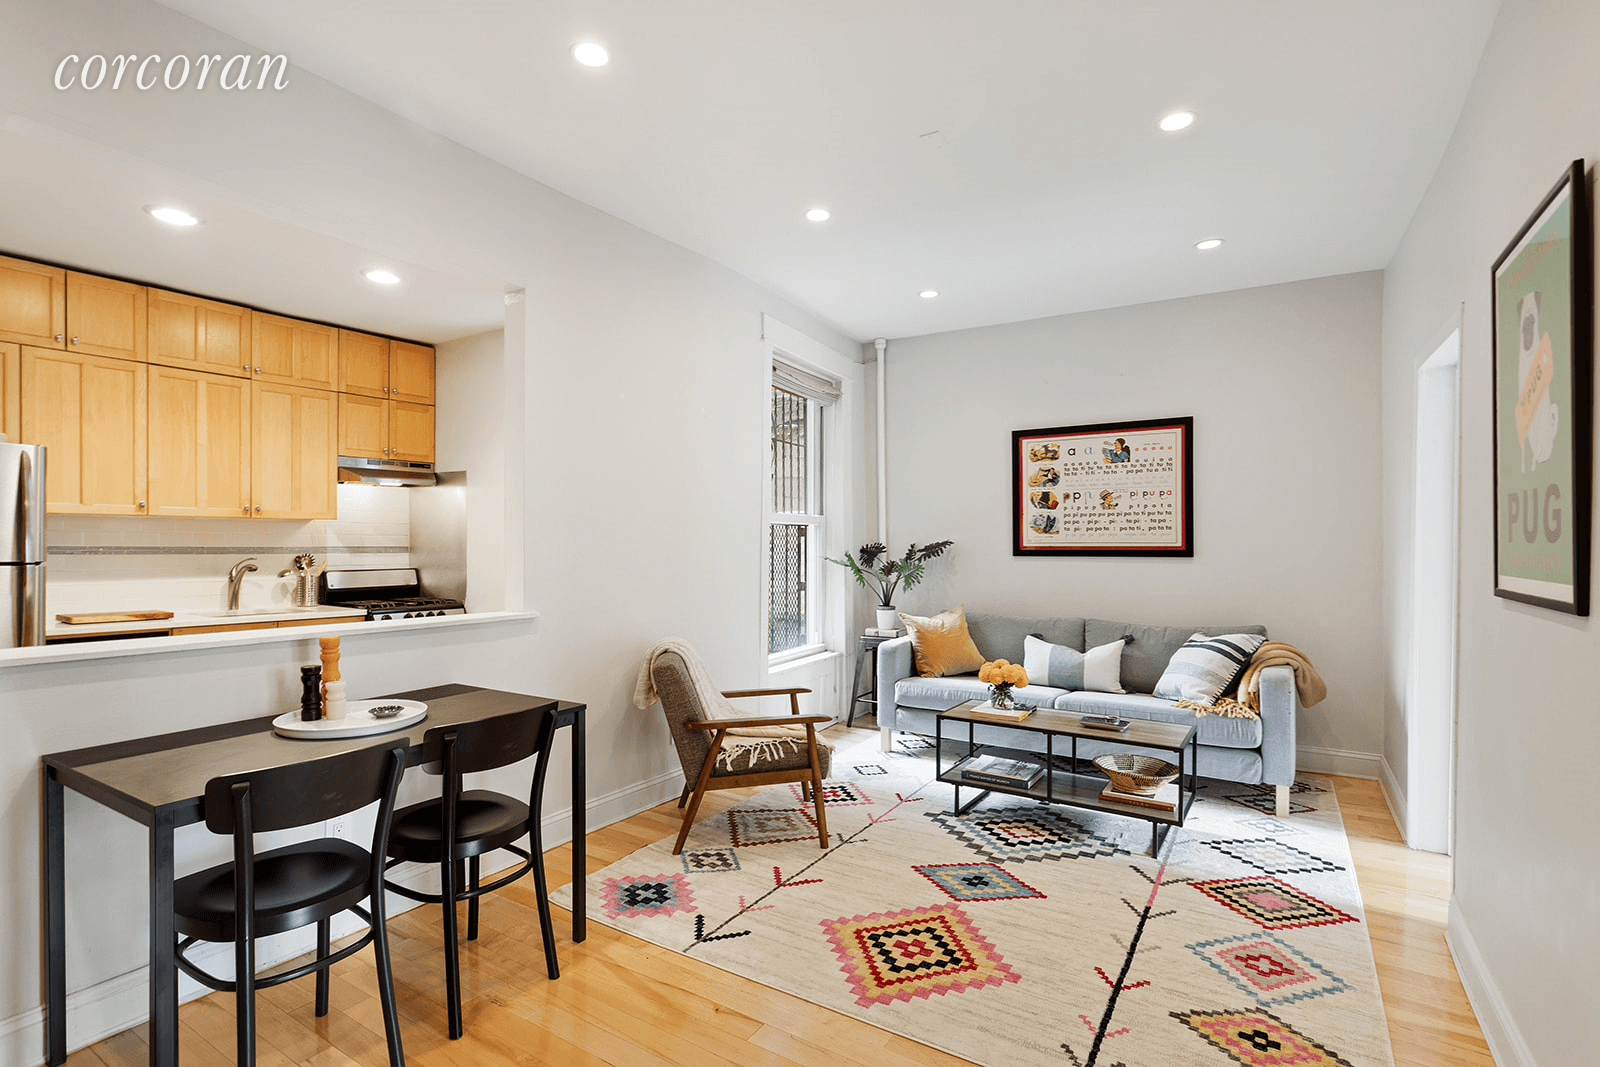 411 15th Street, apt BA charming pre war apartment ideally located one block from Prospect Park, convenient to all that Park Slope and Windsor Terrace have to offer.